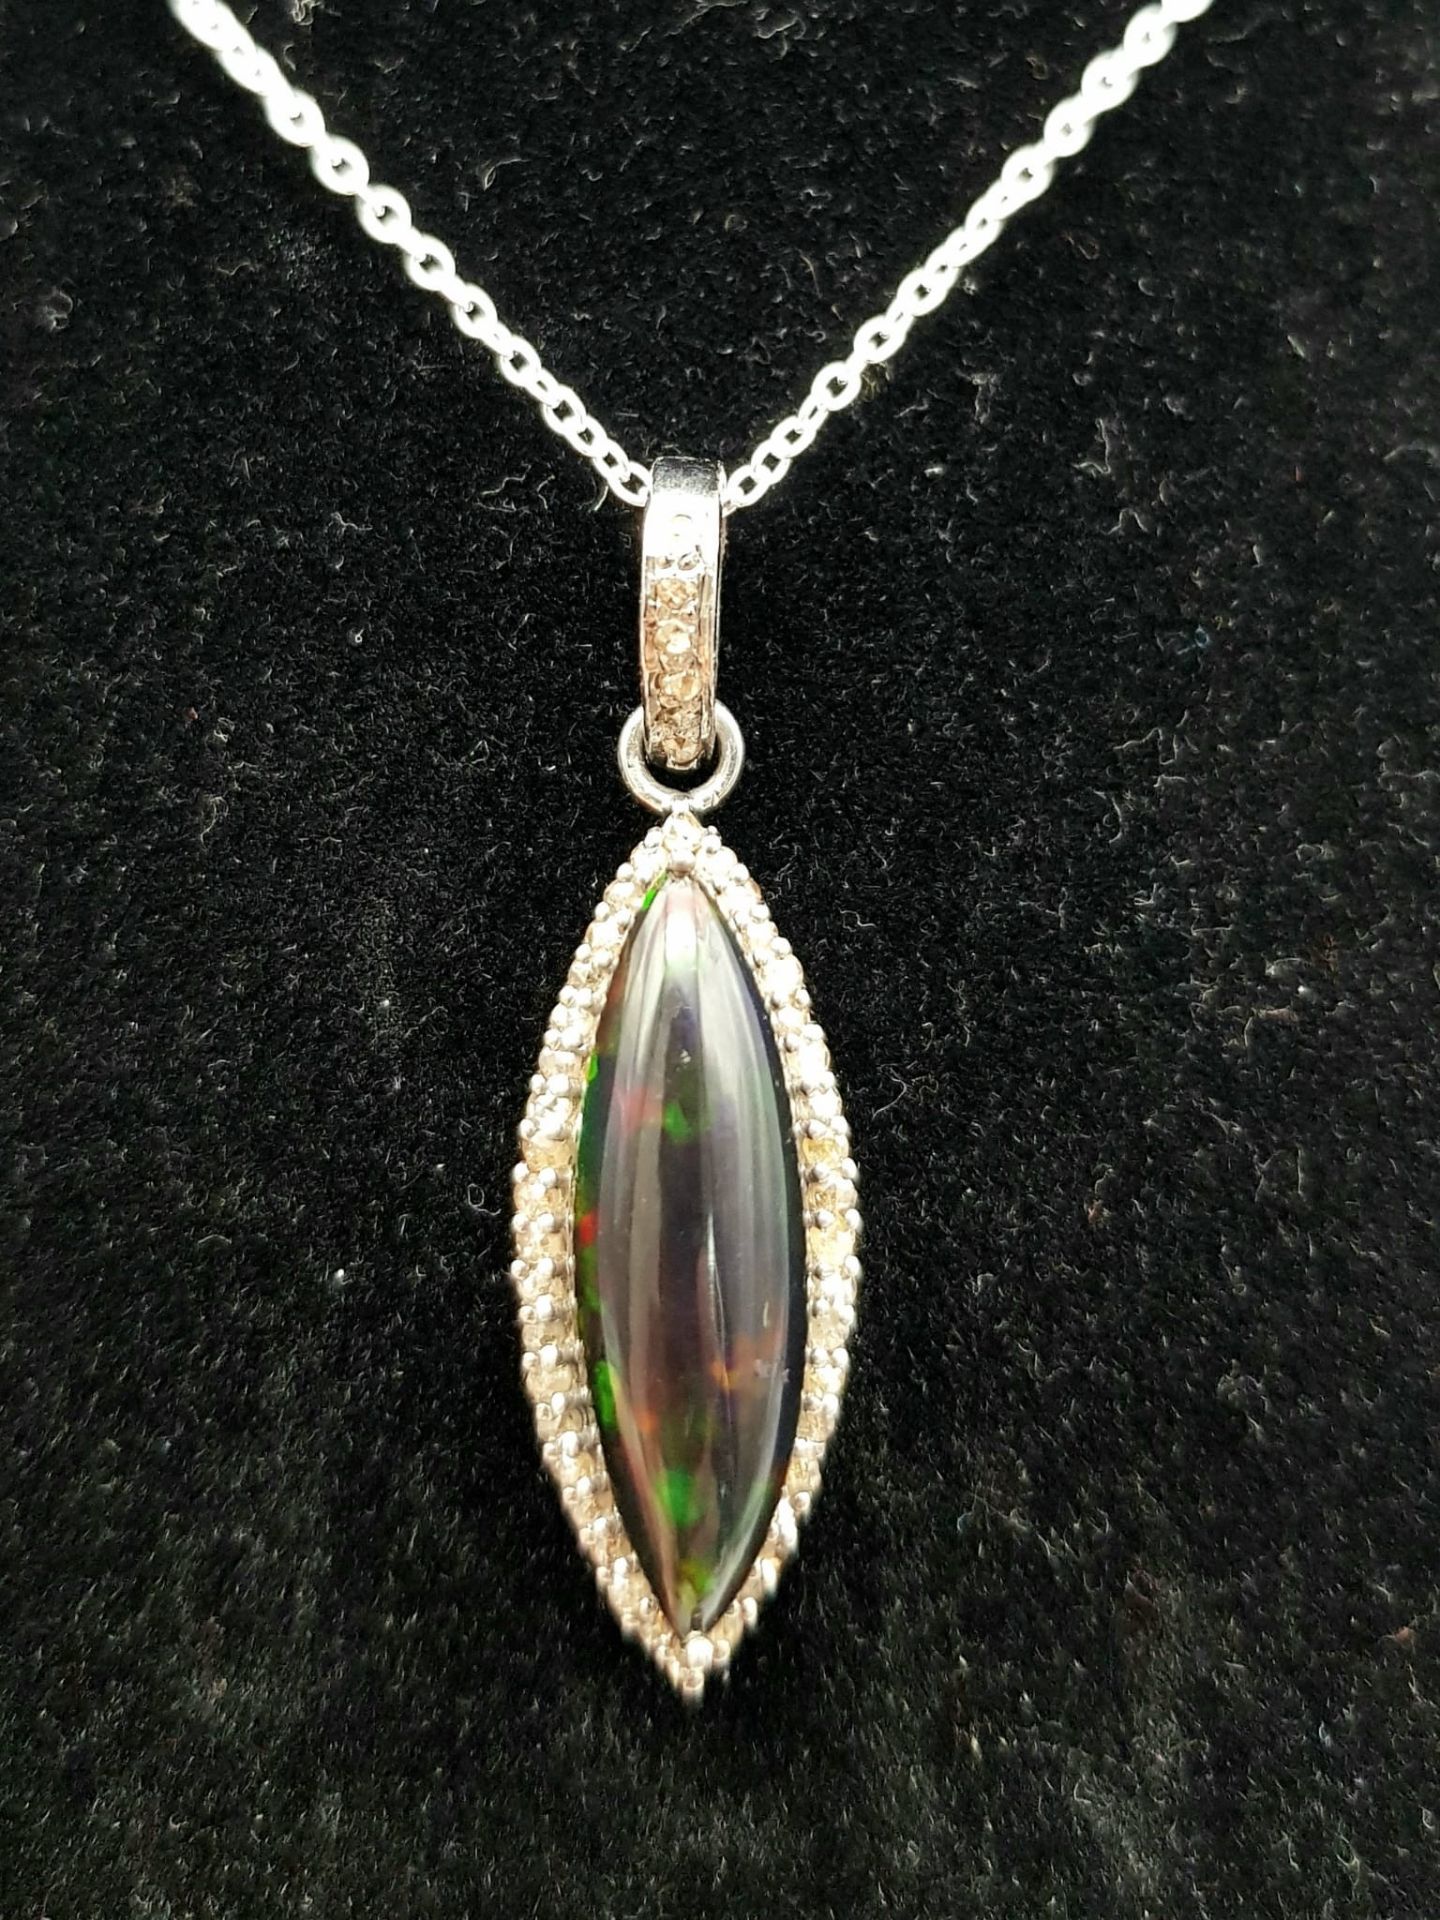 A Marquise Cut Black Opal Pendant with Diamond Surround on 925 Silver and a Silver Chain. 3.75ct - Image 2 of 6